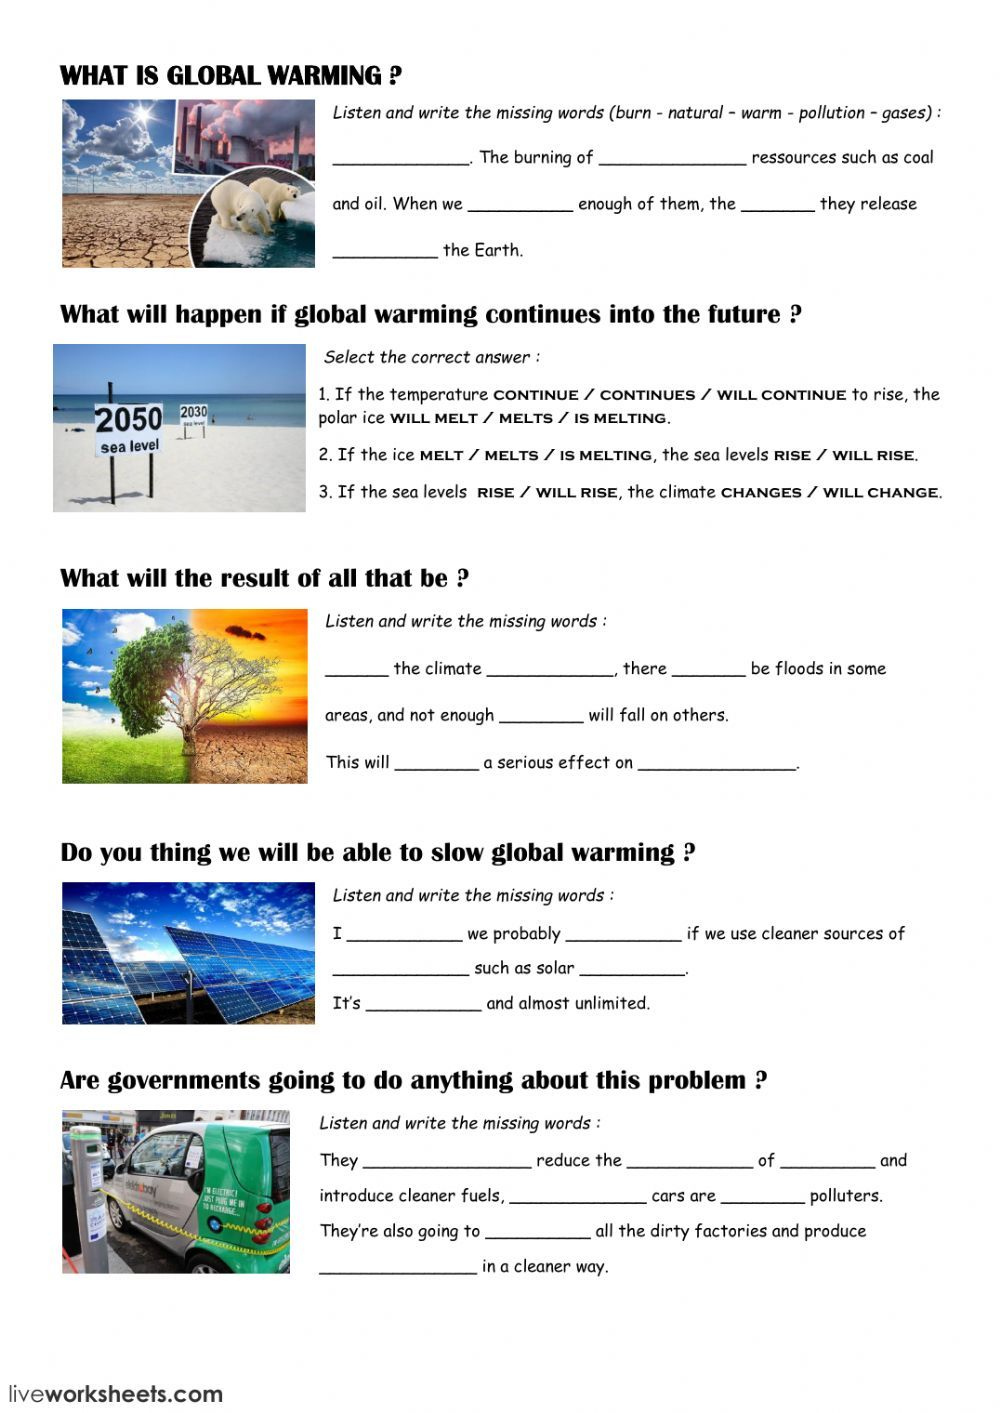 Global Warming Interactive And Downloadable Worksheet You Can Do The 